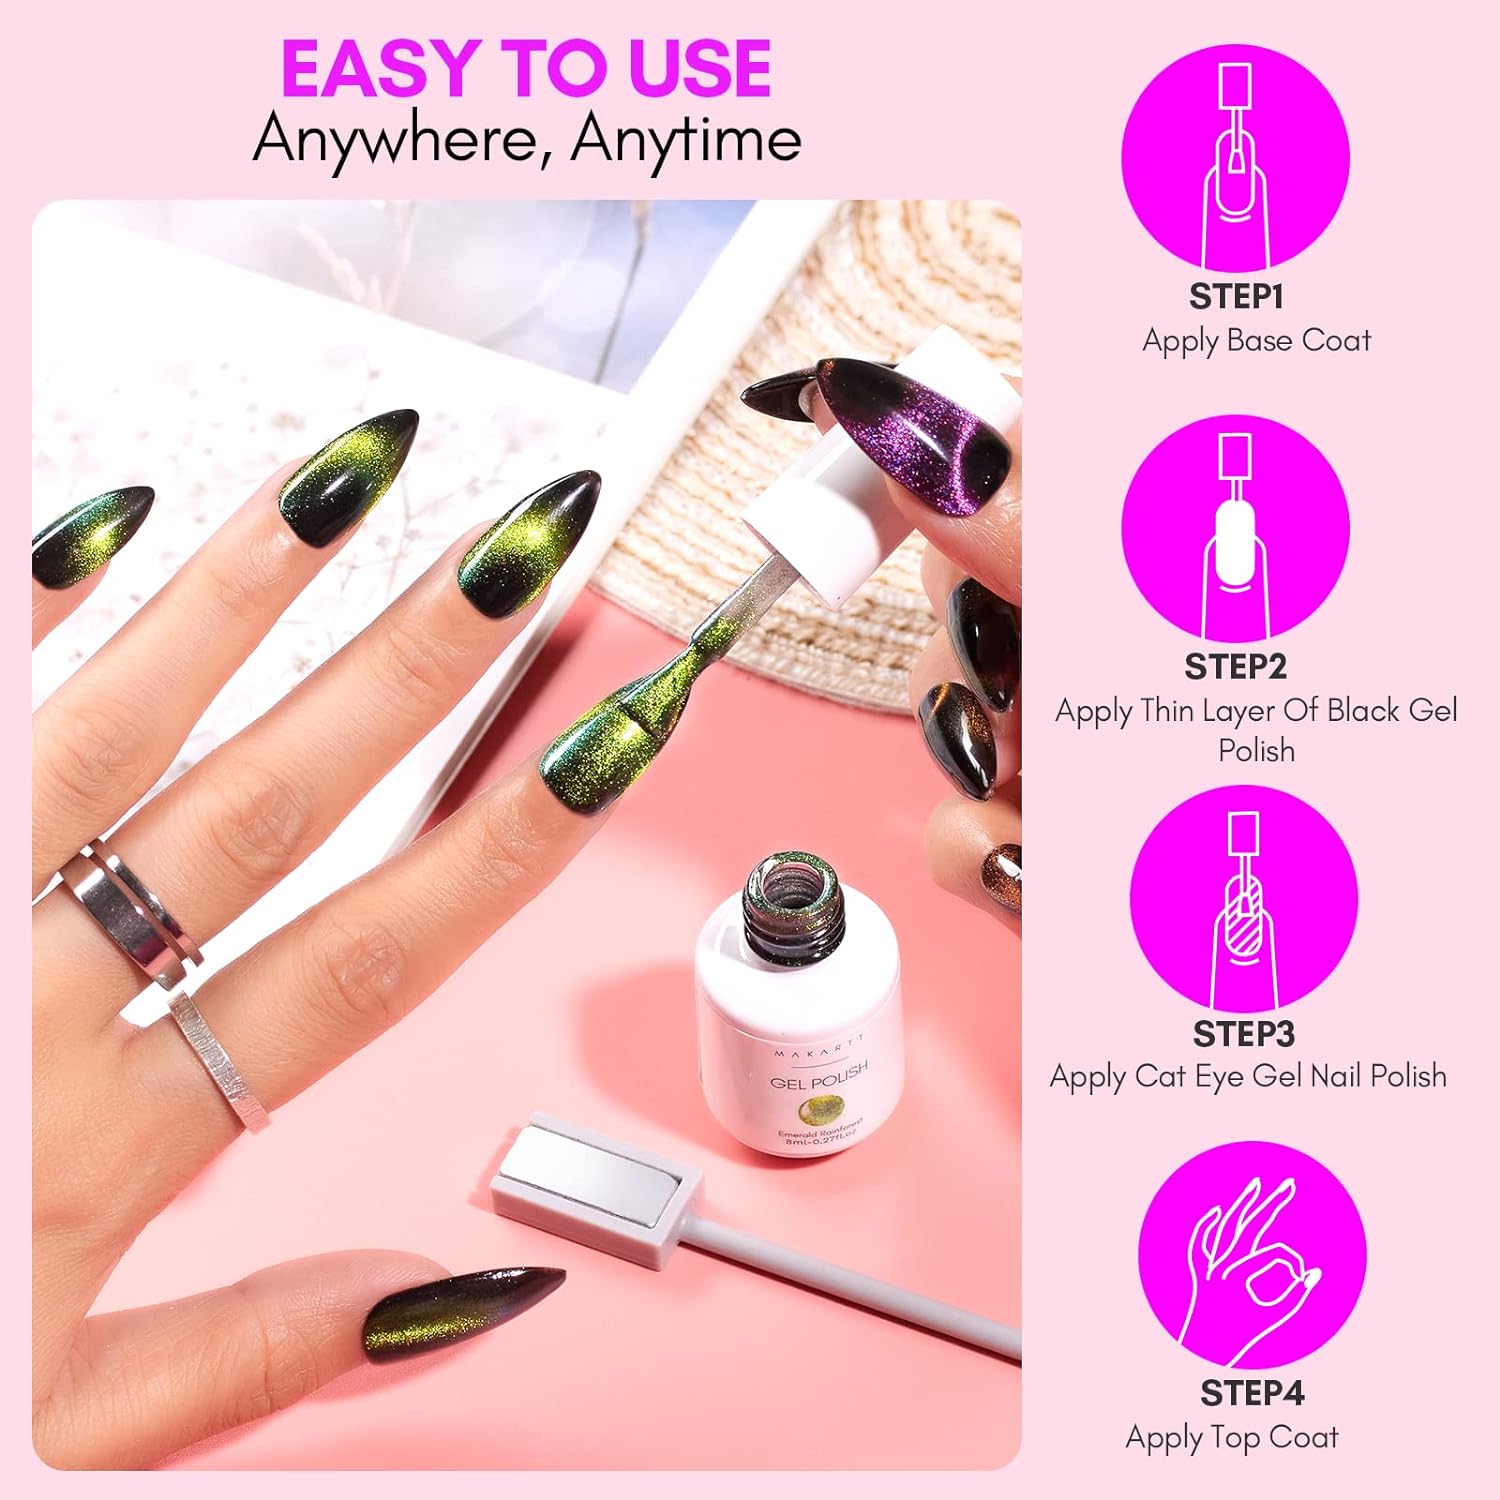 Nail Trends 2023 - The Nail Art Trends To Try As Predicted By An Expert